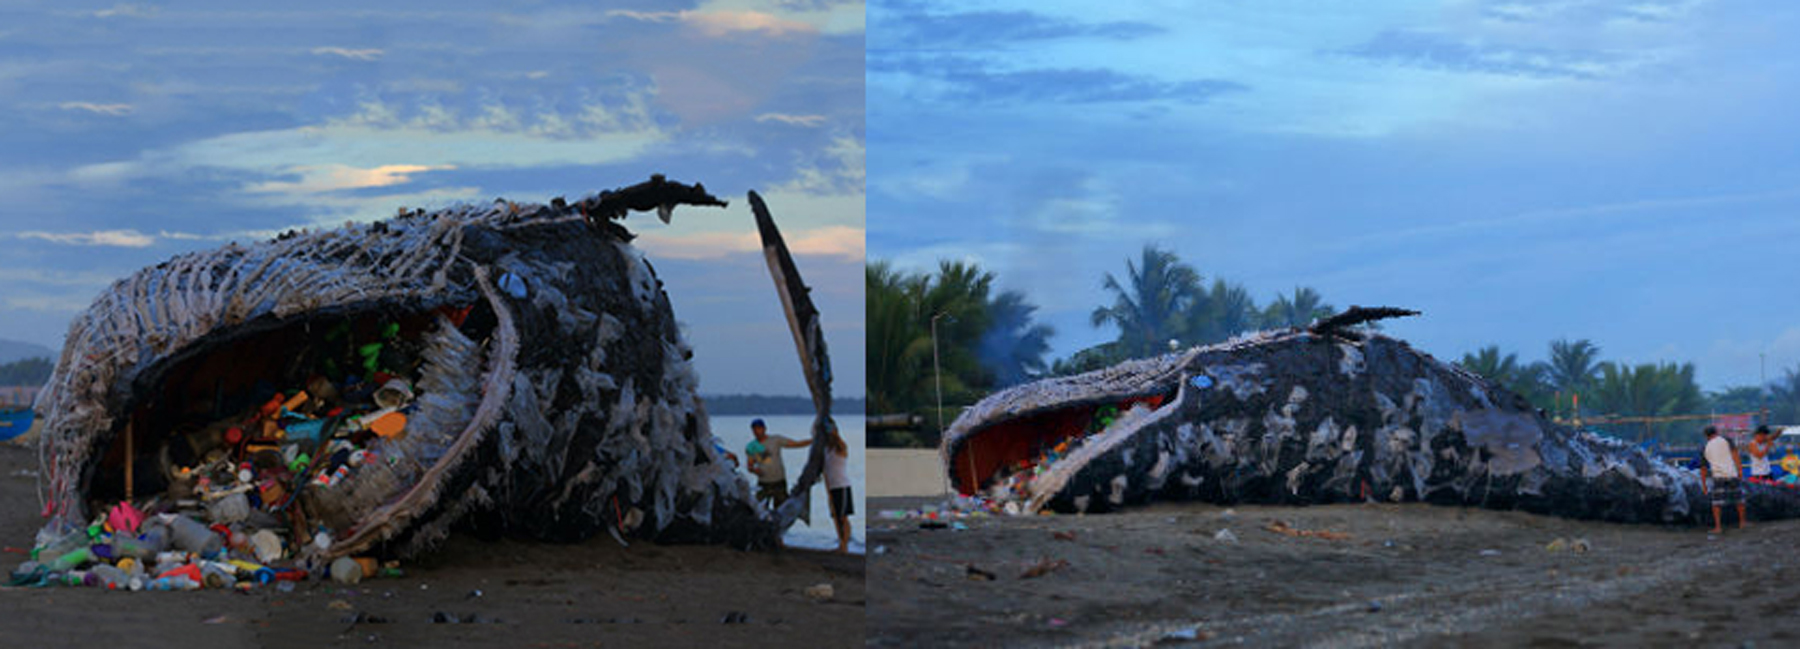 plastic pollution kills another whale after digesting 64 pounds of trash